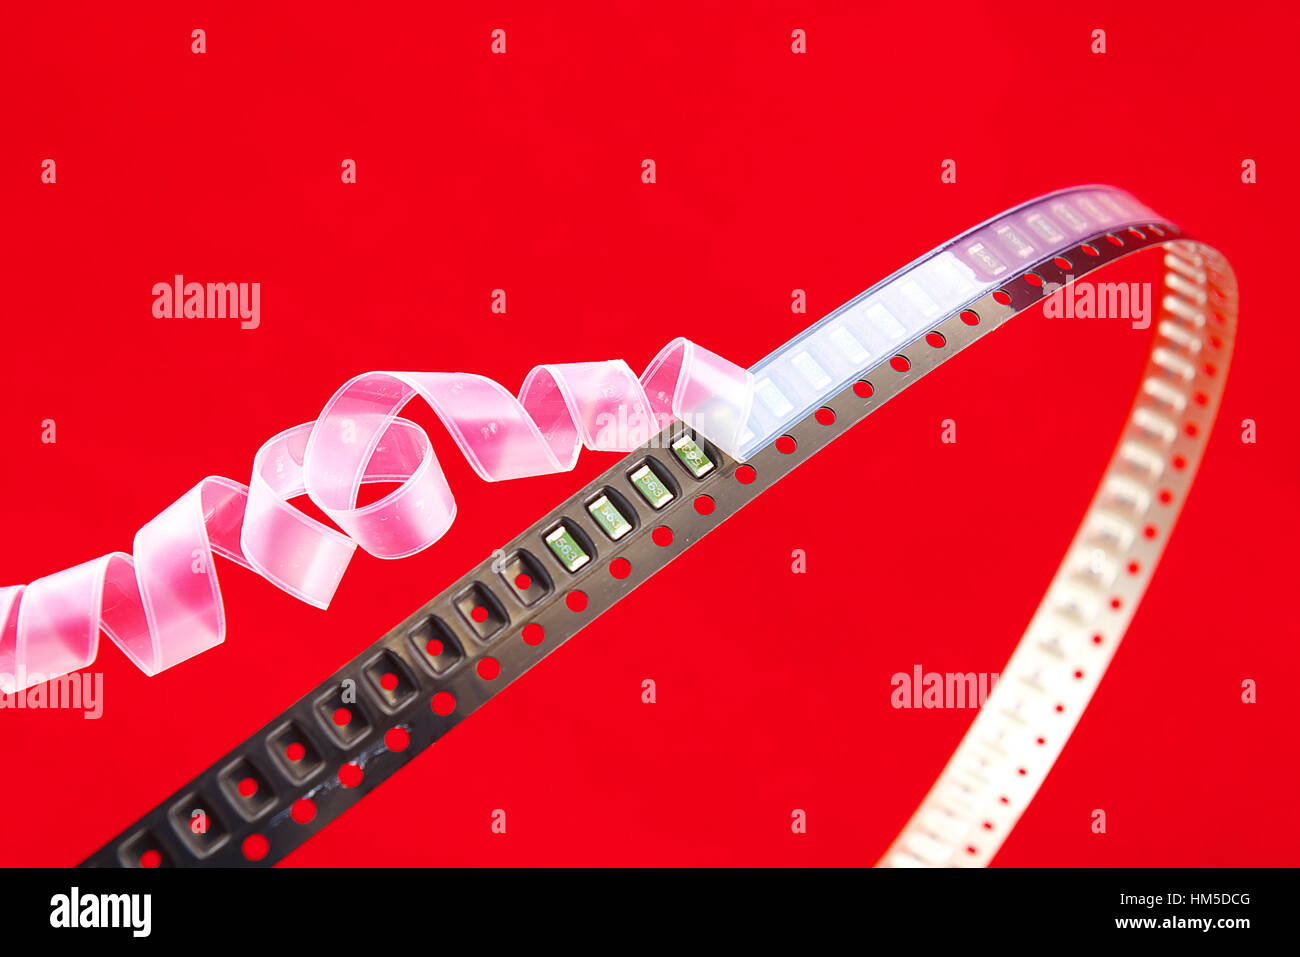 SMD components on a black plastic carrier tape with red background. White cover tape opens Christmas ribbon style. Stock Photo